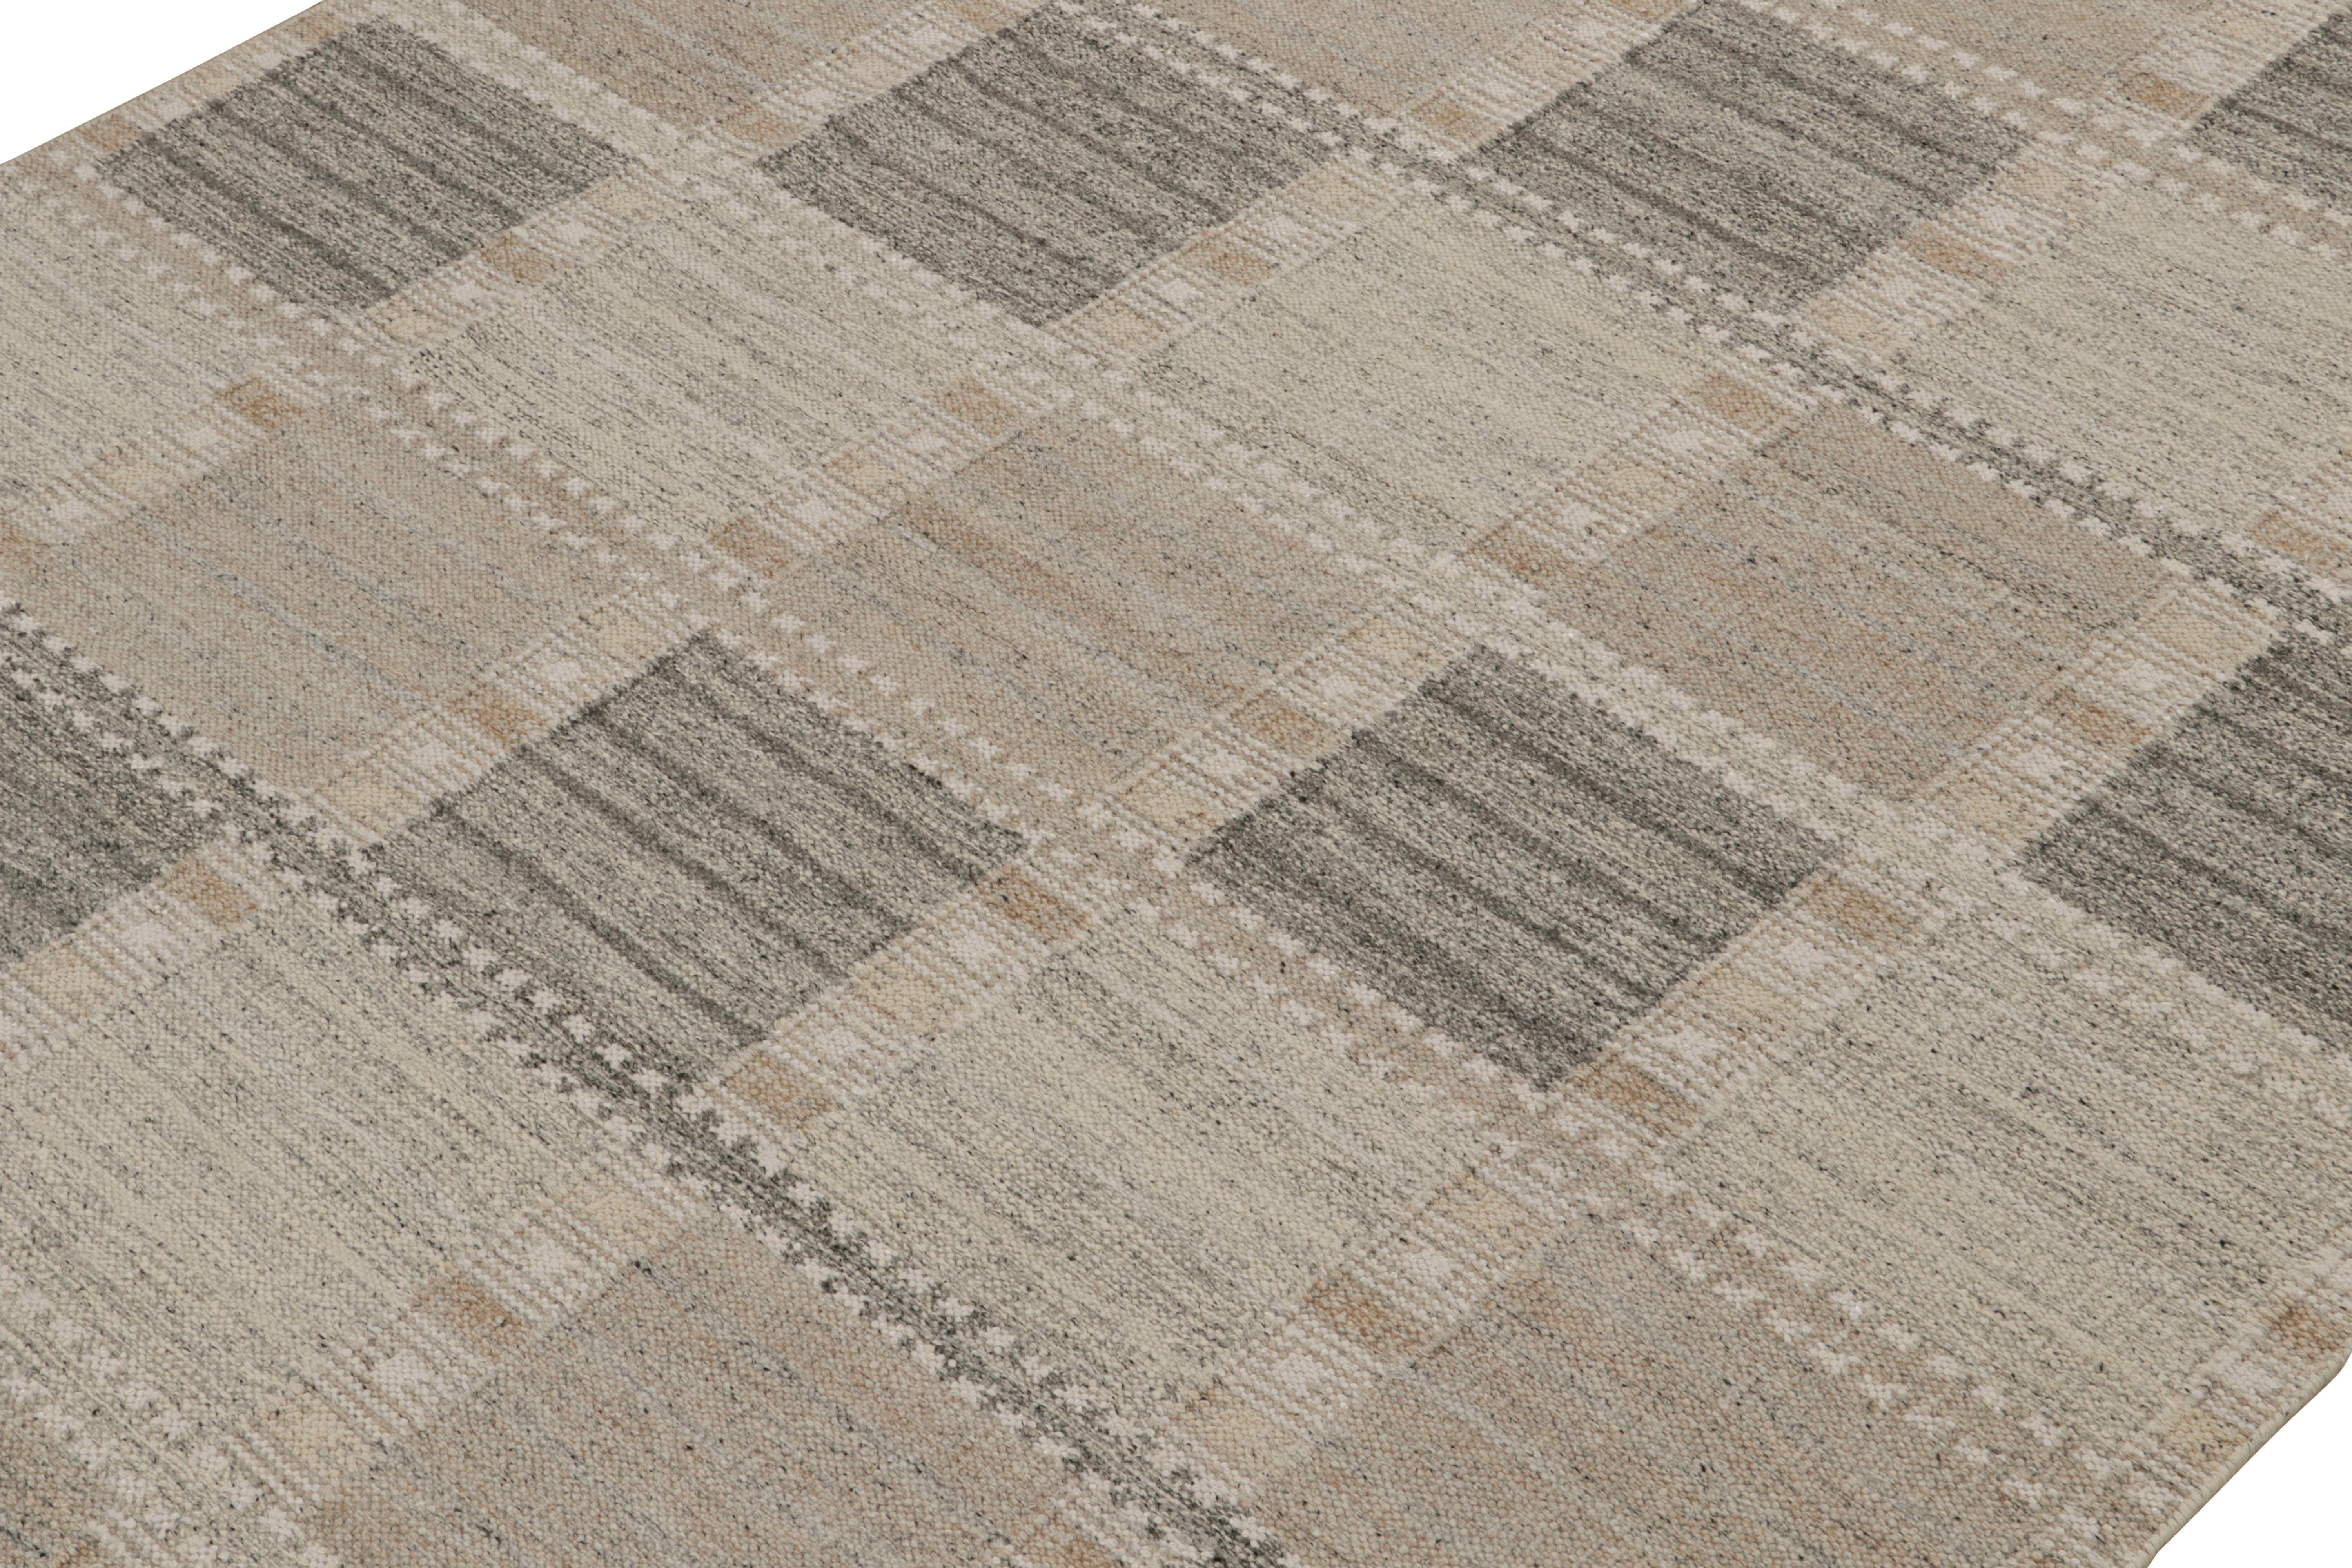 Indian Rug & Kilim’s Scandinavian Style Kilim Rug in Beige and Gray Geometric Patterns For Sale